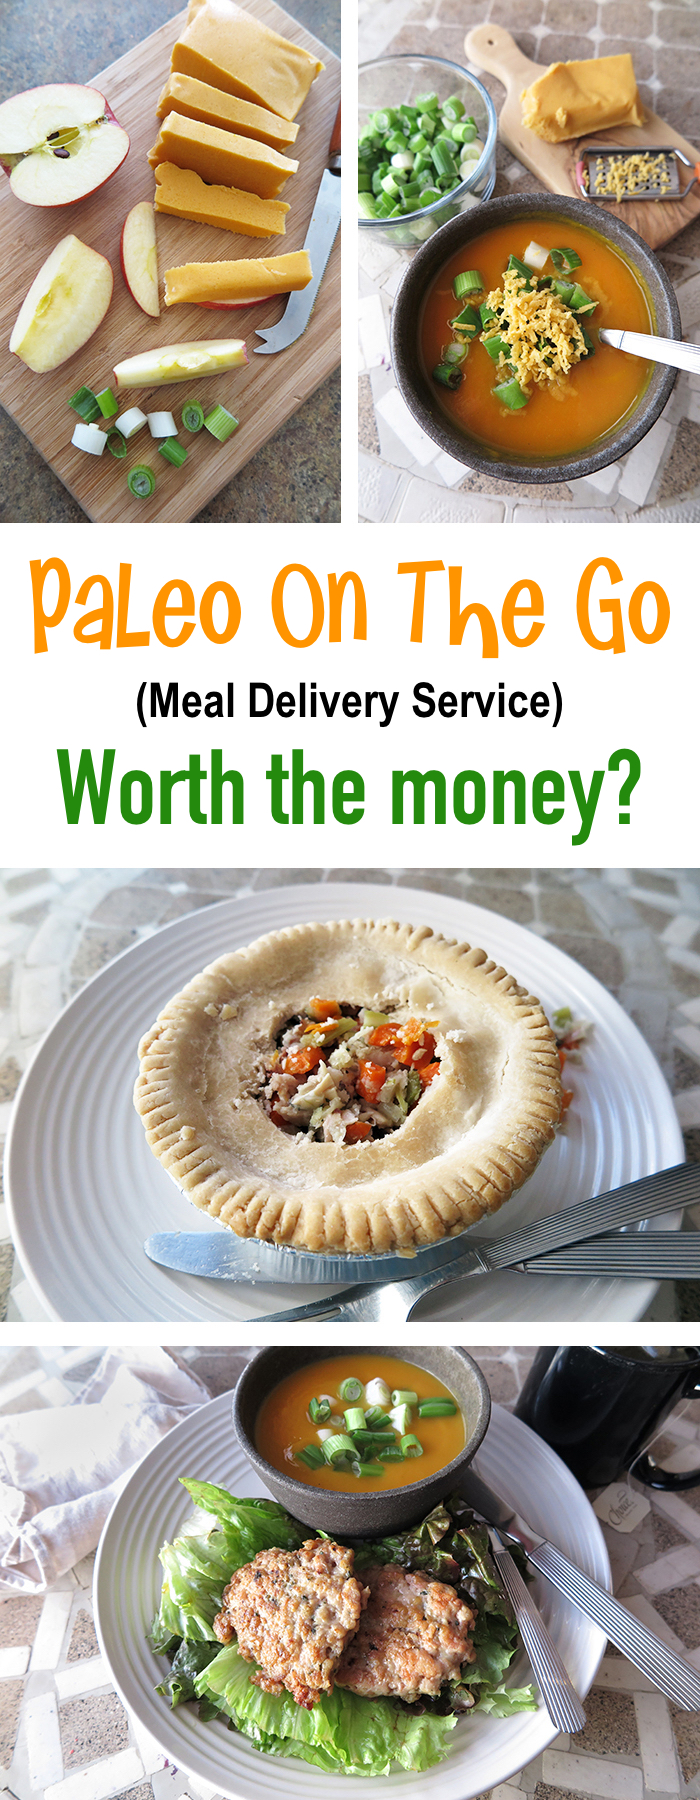 Paleo On The Go has an entire menu offering AIP-friendly meals for everyone following the strict elimination phase of the Paleo Autoimmune Protocol!